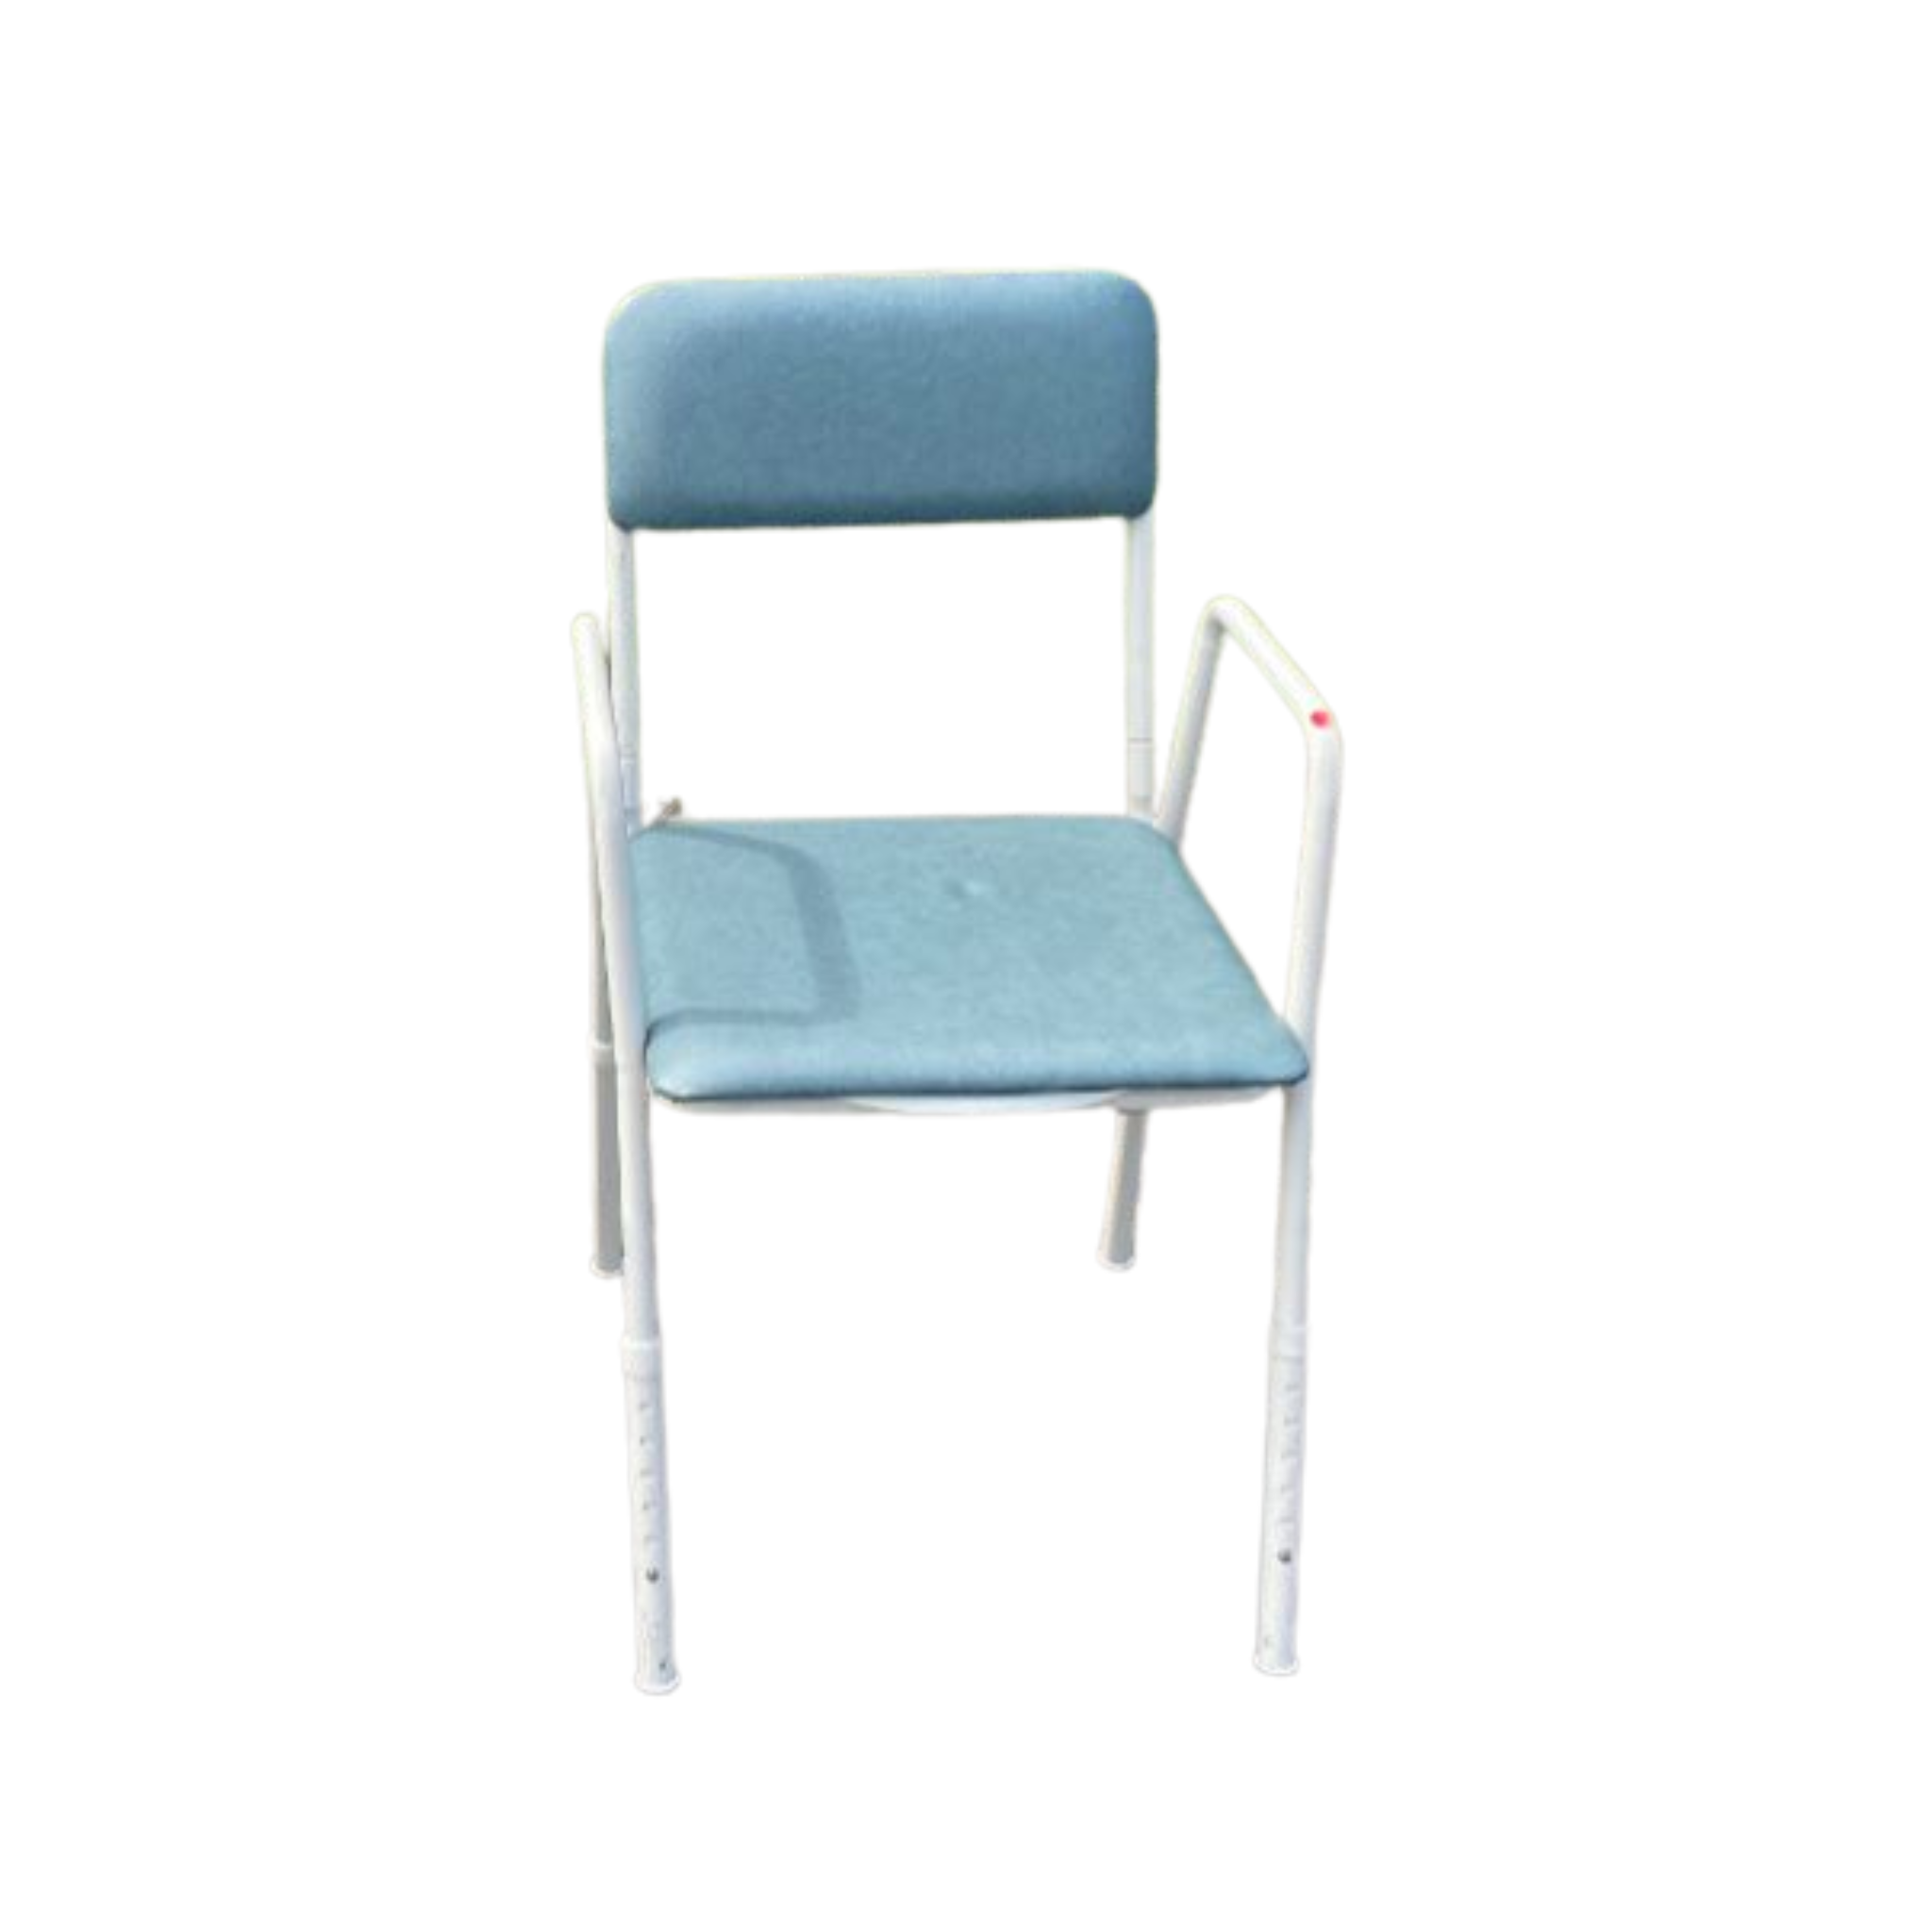 Rental - Economy Bedside Commode, Green from Aged Care and Medical - Bedside Commode for Hire for Aged Care